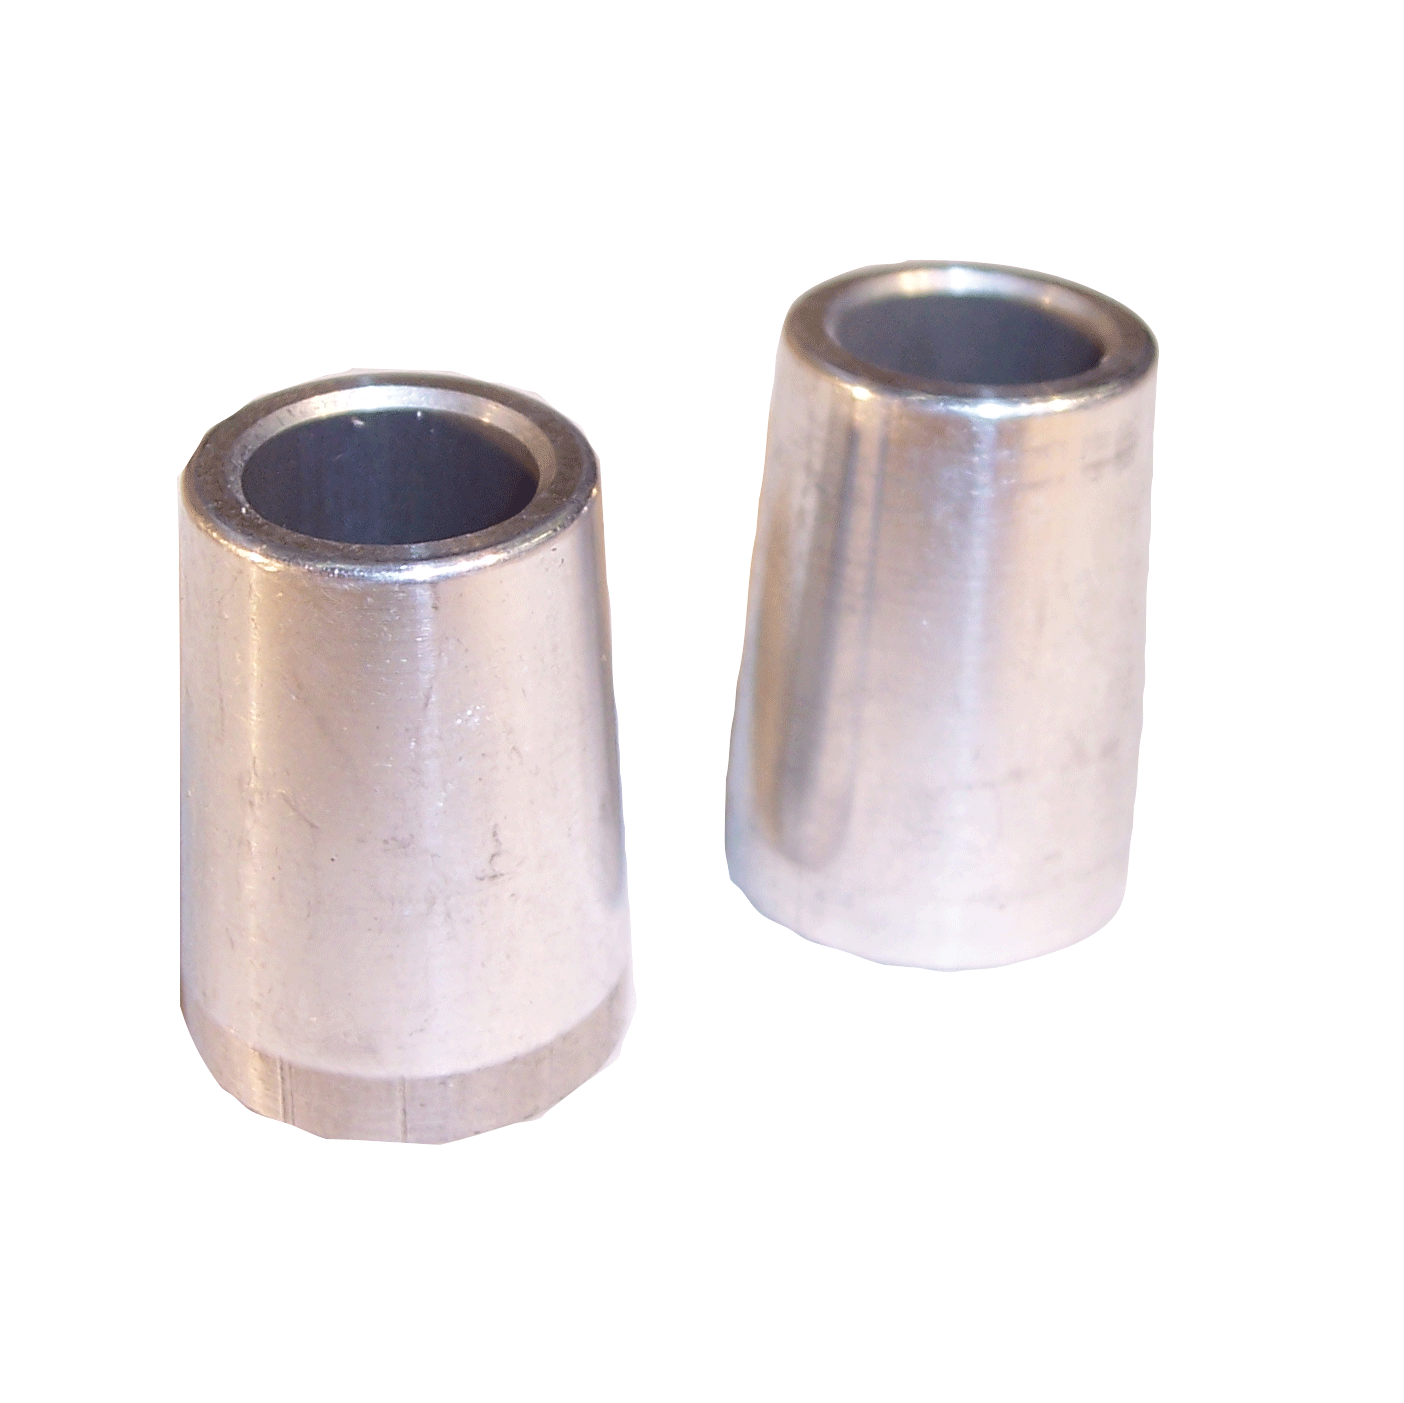 3/8" Tall Cone Spacers 2-Pack